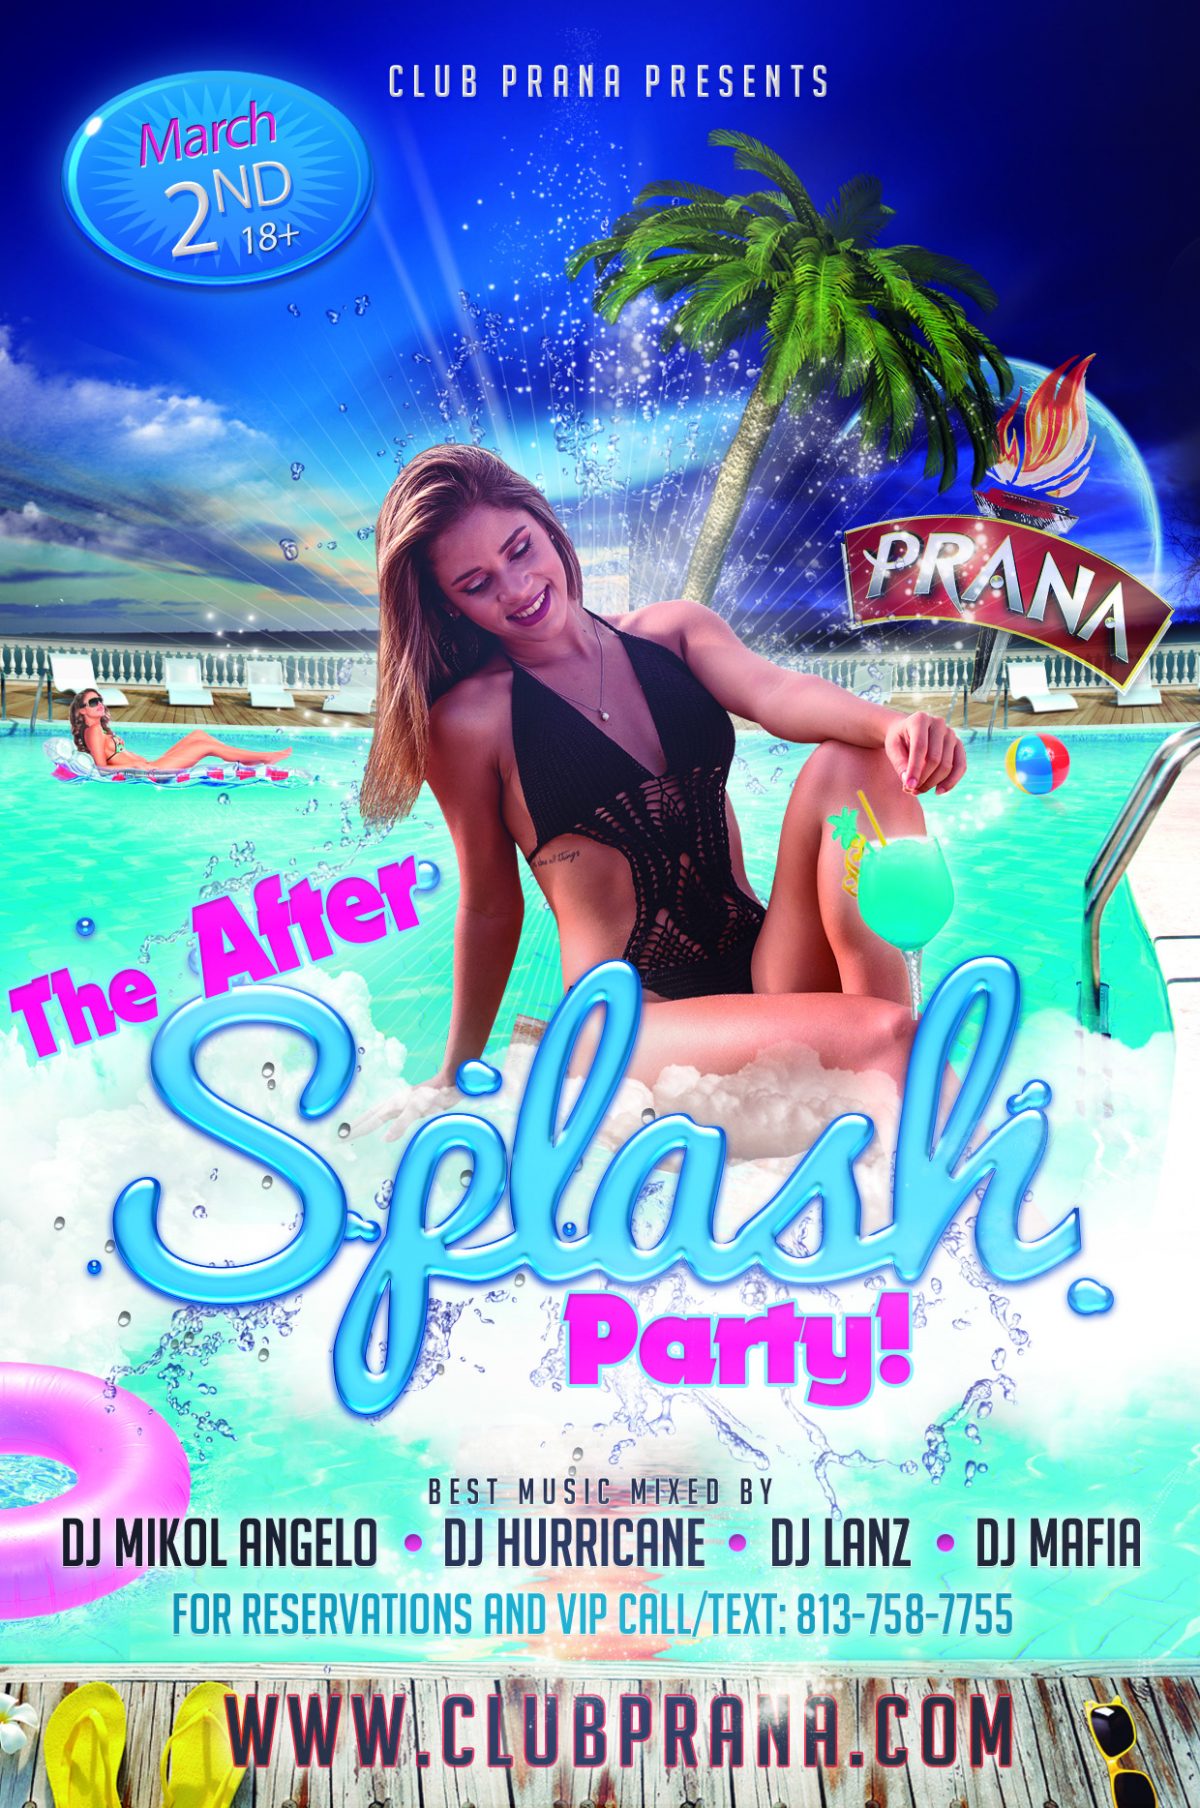 The After Splash Party